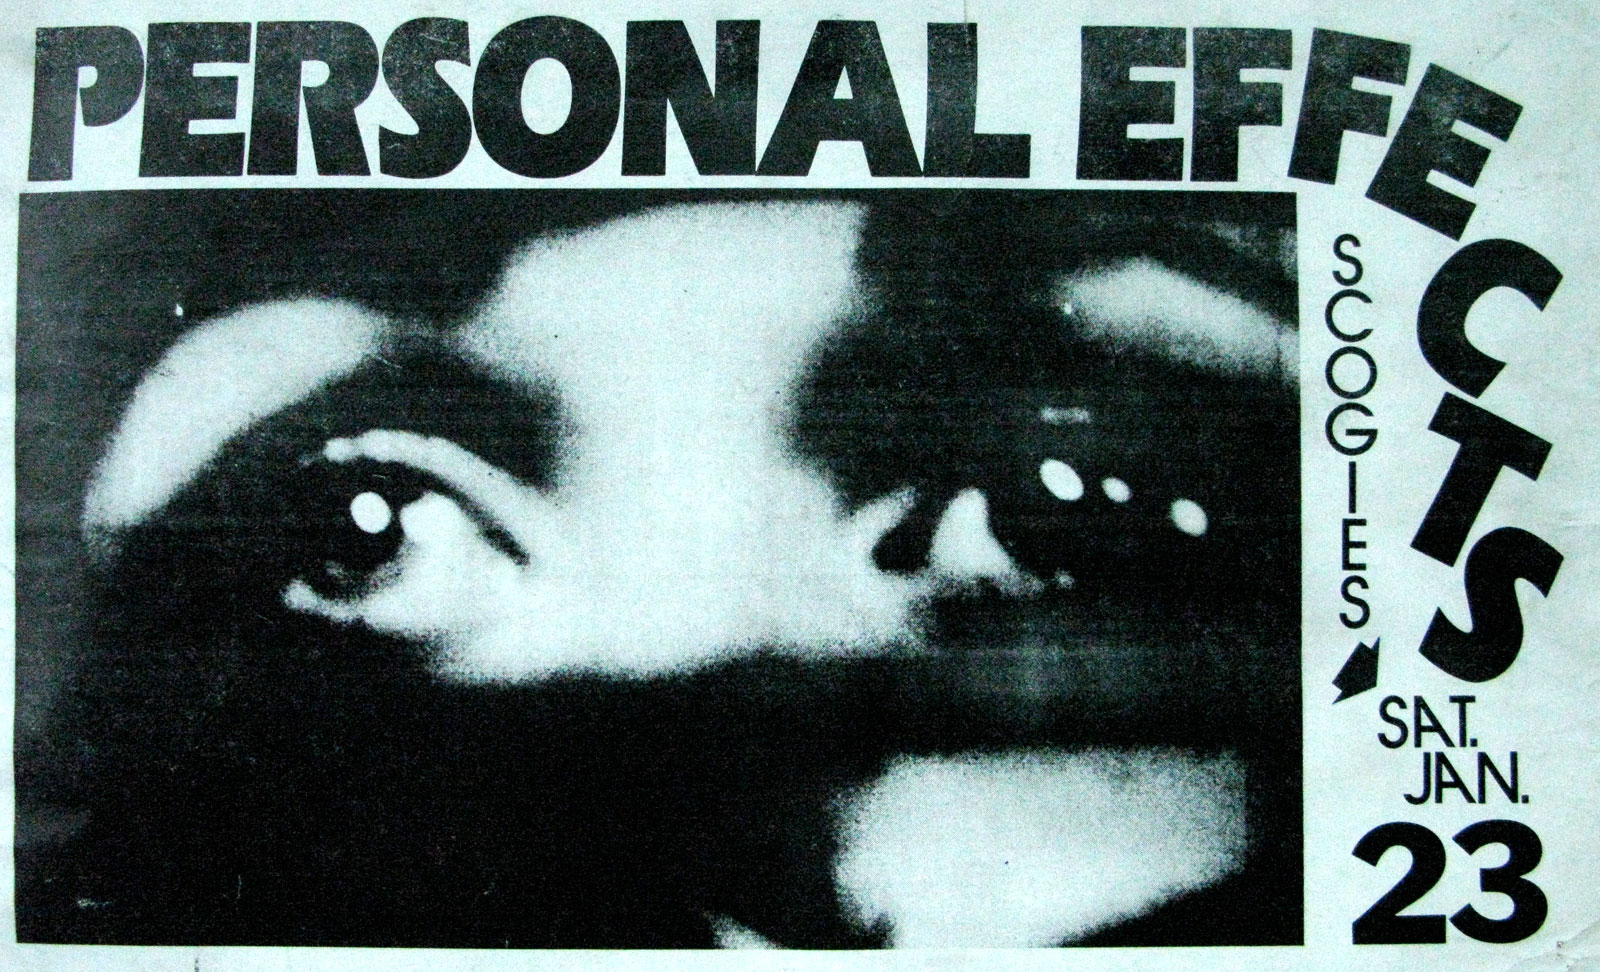 Poster for Personal Effects at Scorgies in Rochester, New York 01.23.1982